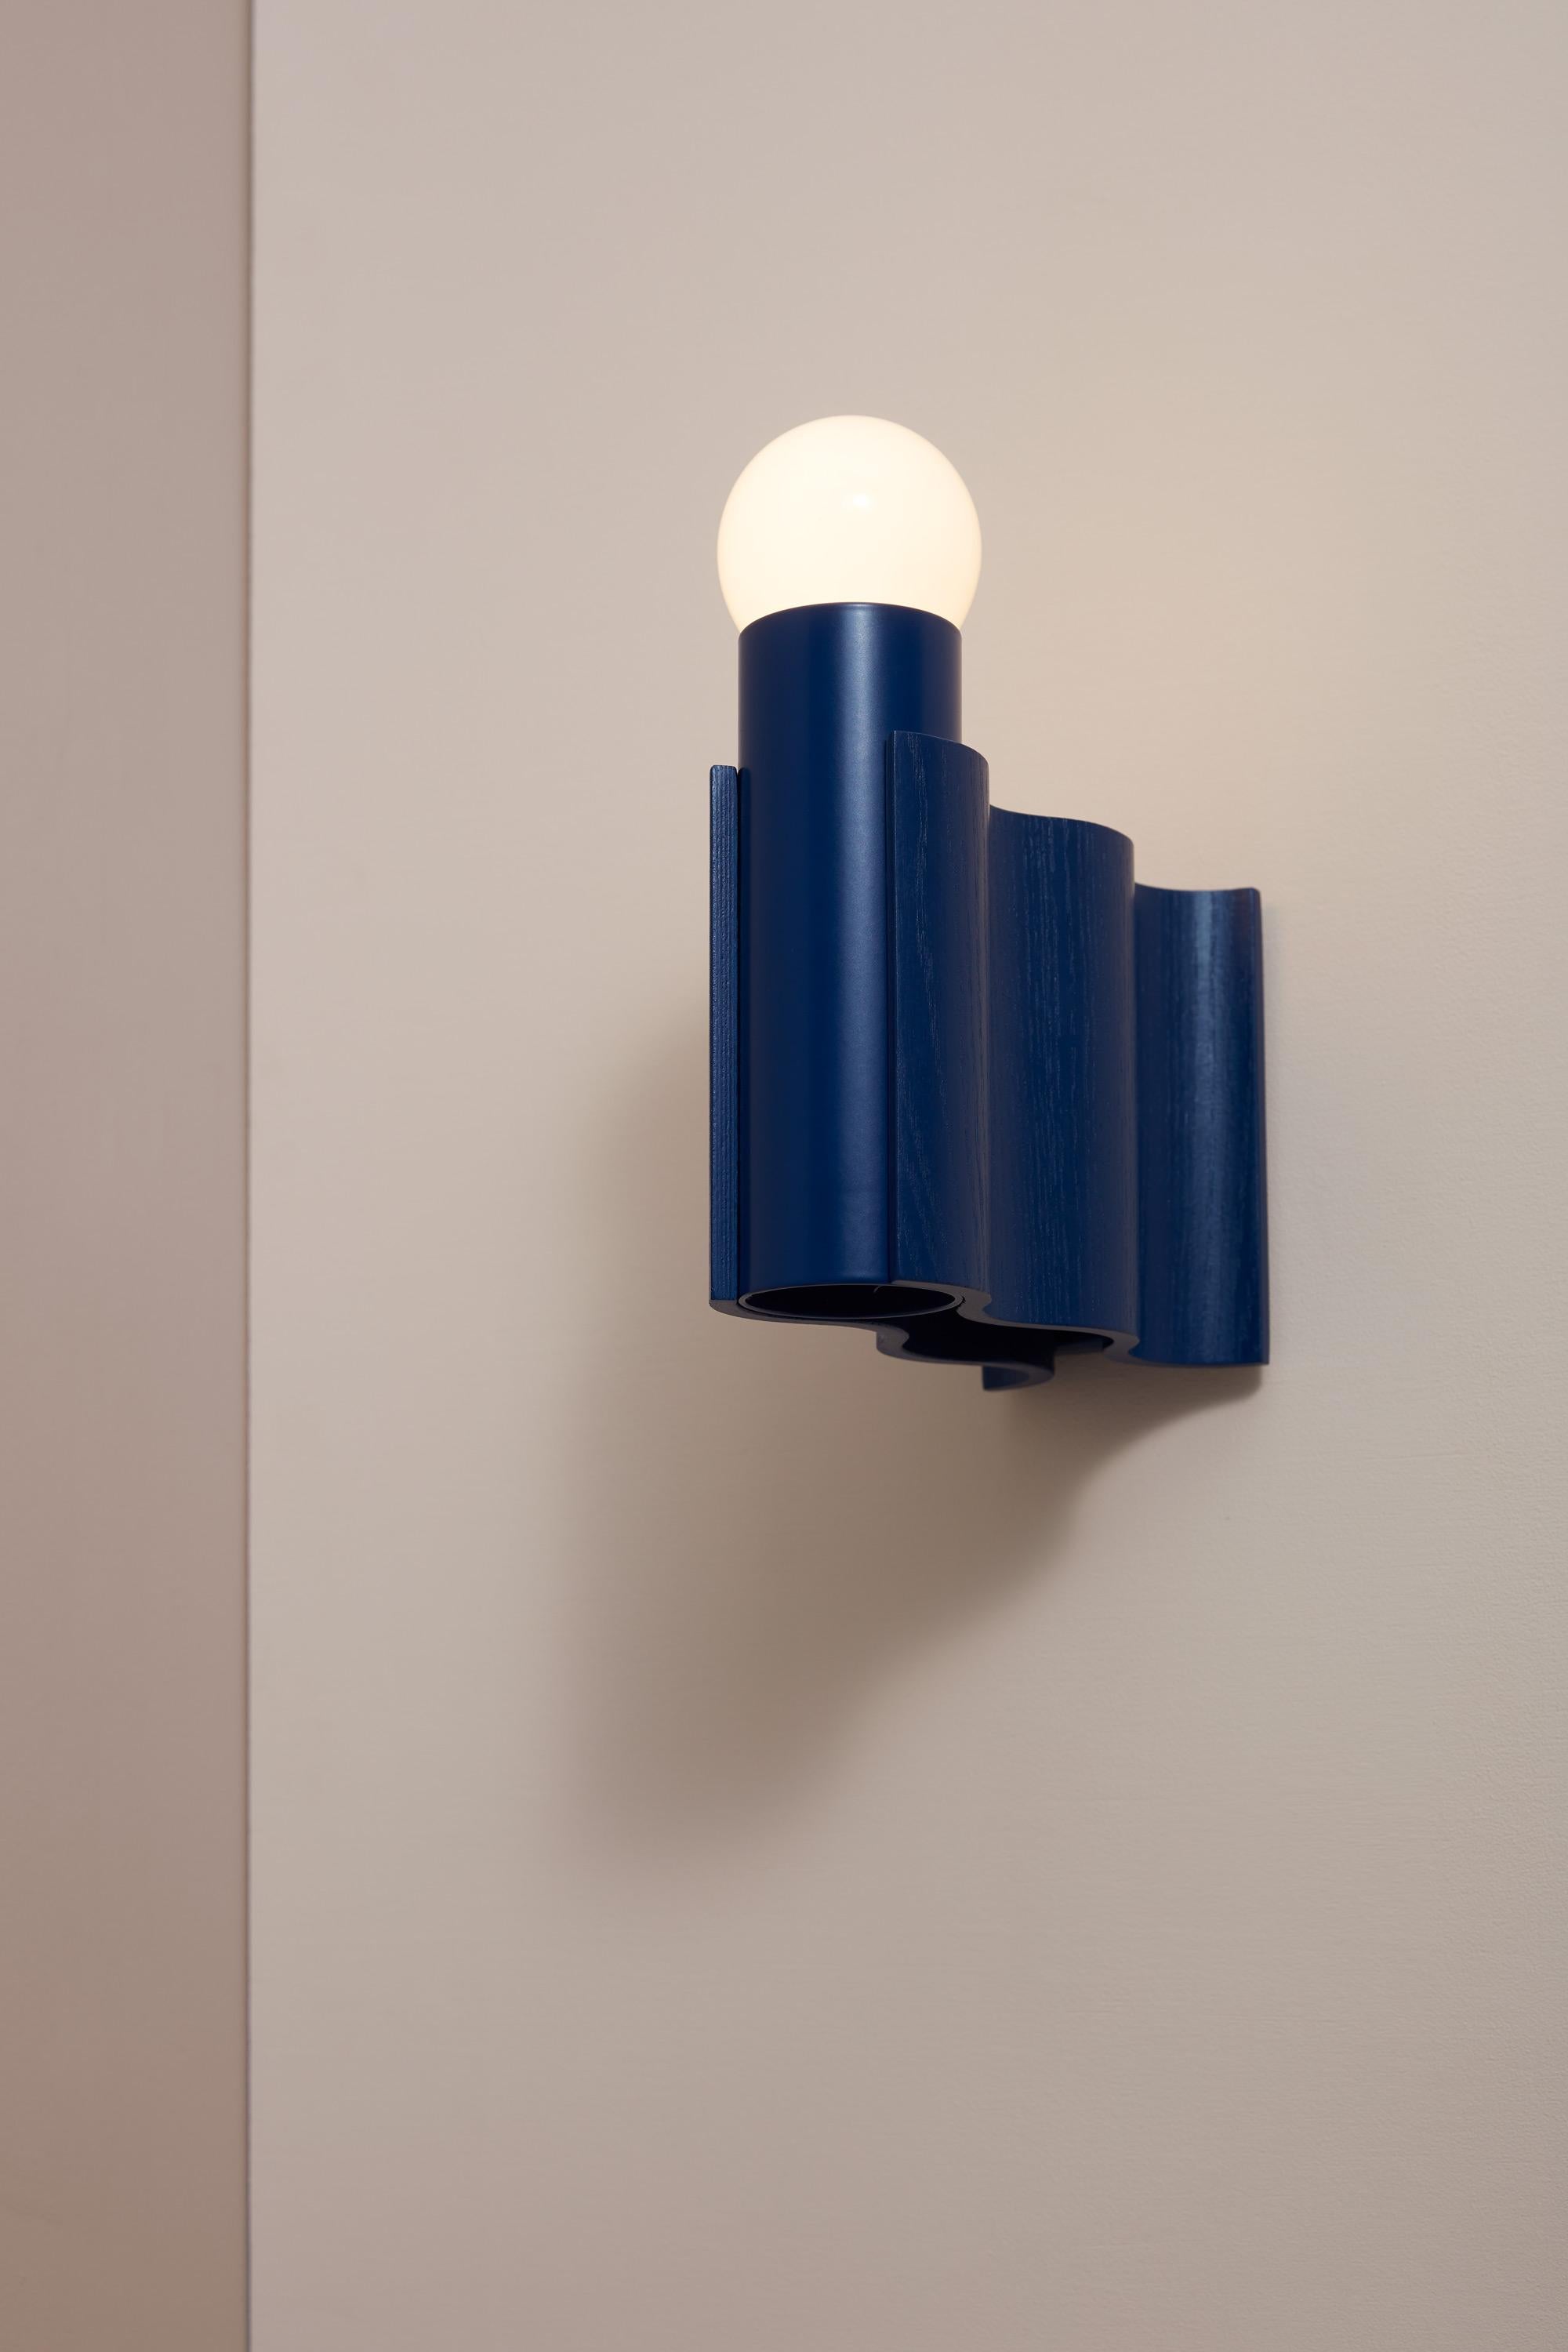 Double Corrugation Sconce / Wall Light in Natural Ash Veneer and Sapphire Blue For Sale 3